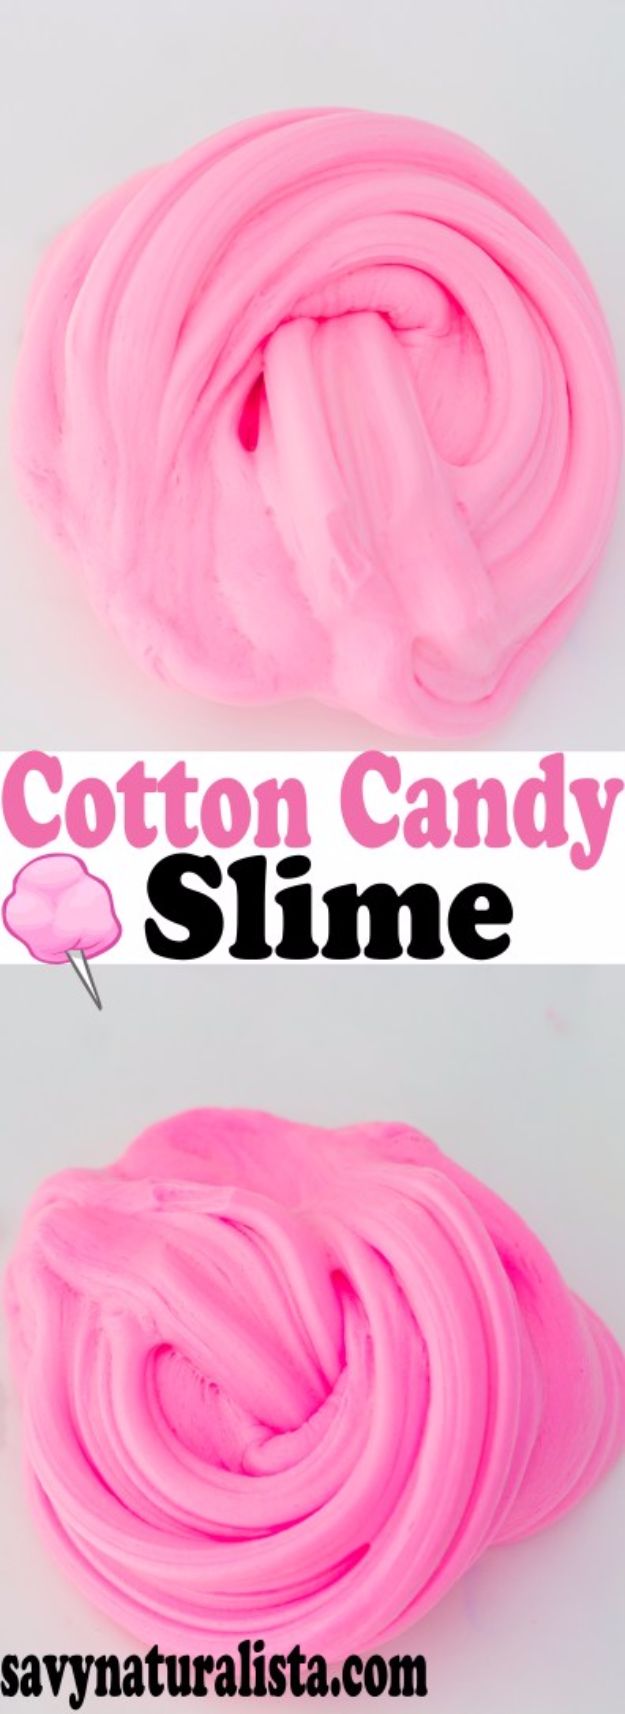 Best DIY Slime Recipes - Cotton Candy Slime - Cool and Easy Slime Recipe and Tutorials - Ideas Without Glue, Without Borax, For Kids, With Liquid Starch, Cornstarch and Laundry Detergent - How to Make Slime at Home - Fun Crafts and DIY Projects for Teens, Kids, Teenagers and Teens - Galaxy and Glitter Slime, Edible Slime, Rainbow Colored Slime, Shaving Cream recipes and more fun crafts and slimes #slimerecipes #slime #diyslime #teencrafts